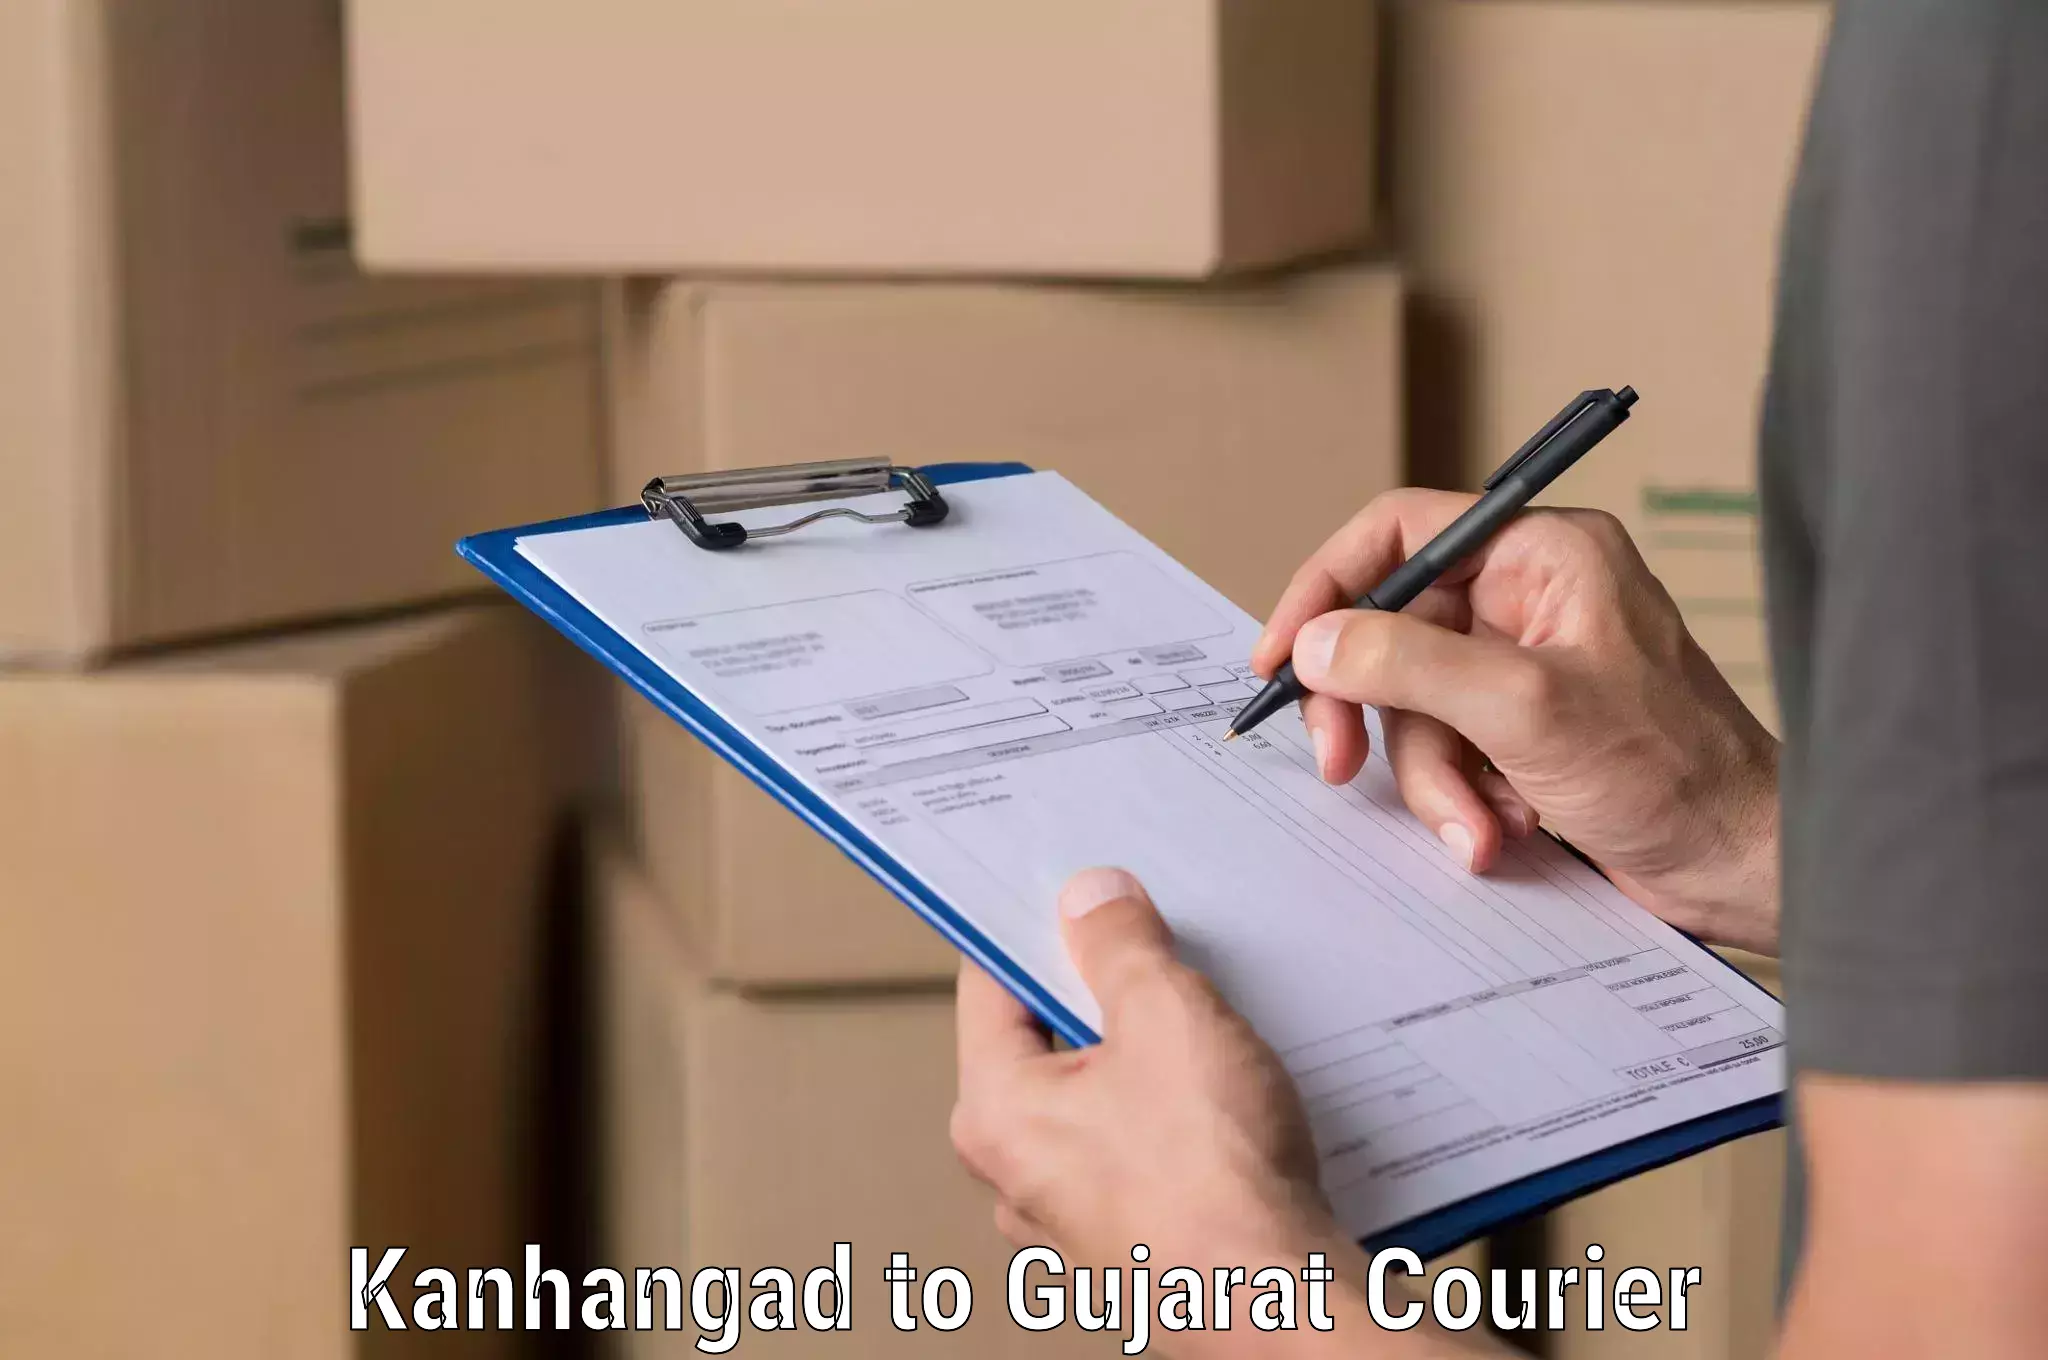 Global freight services Kanhangad to Veraval